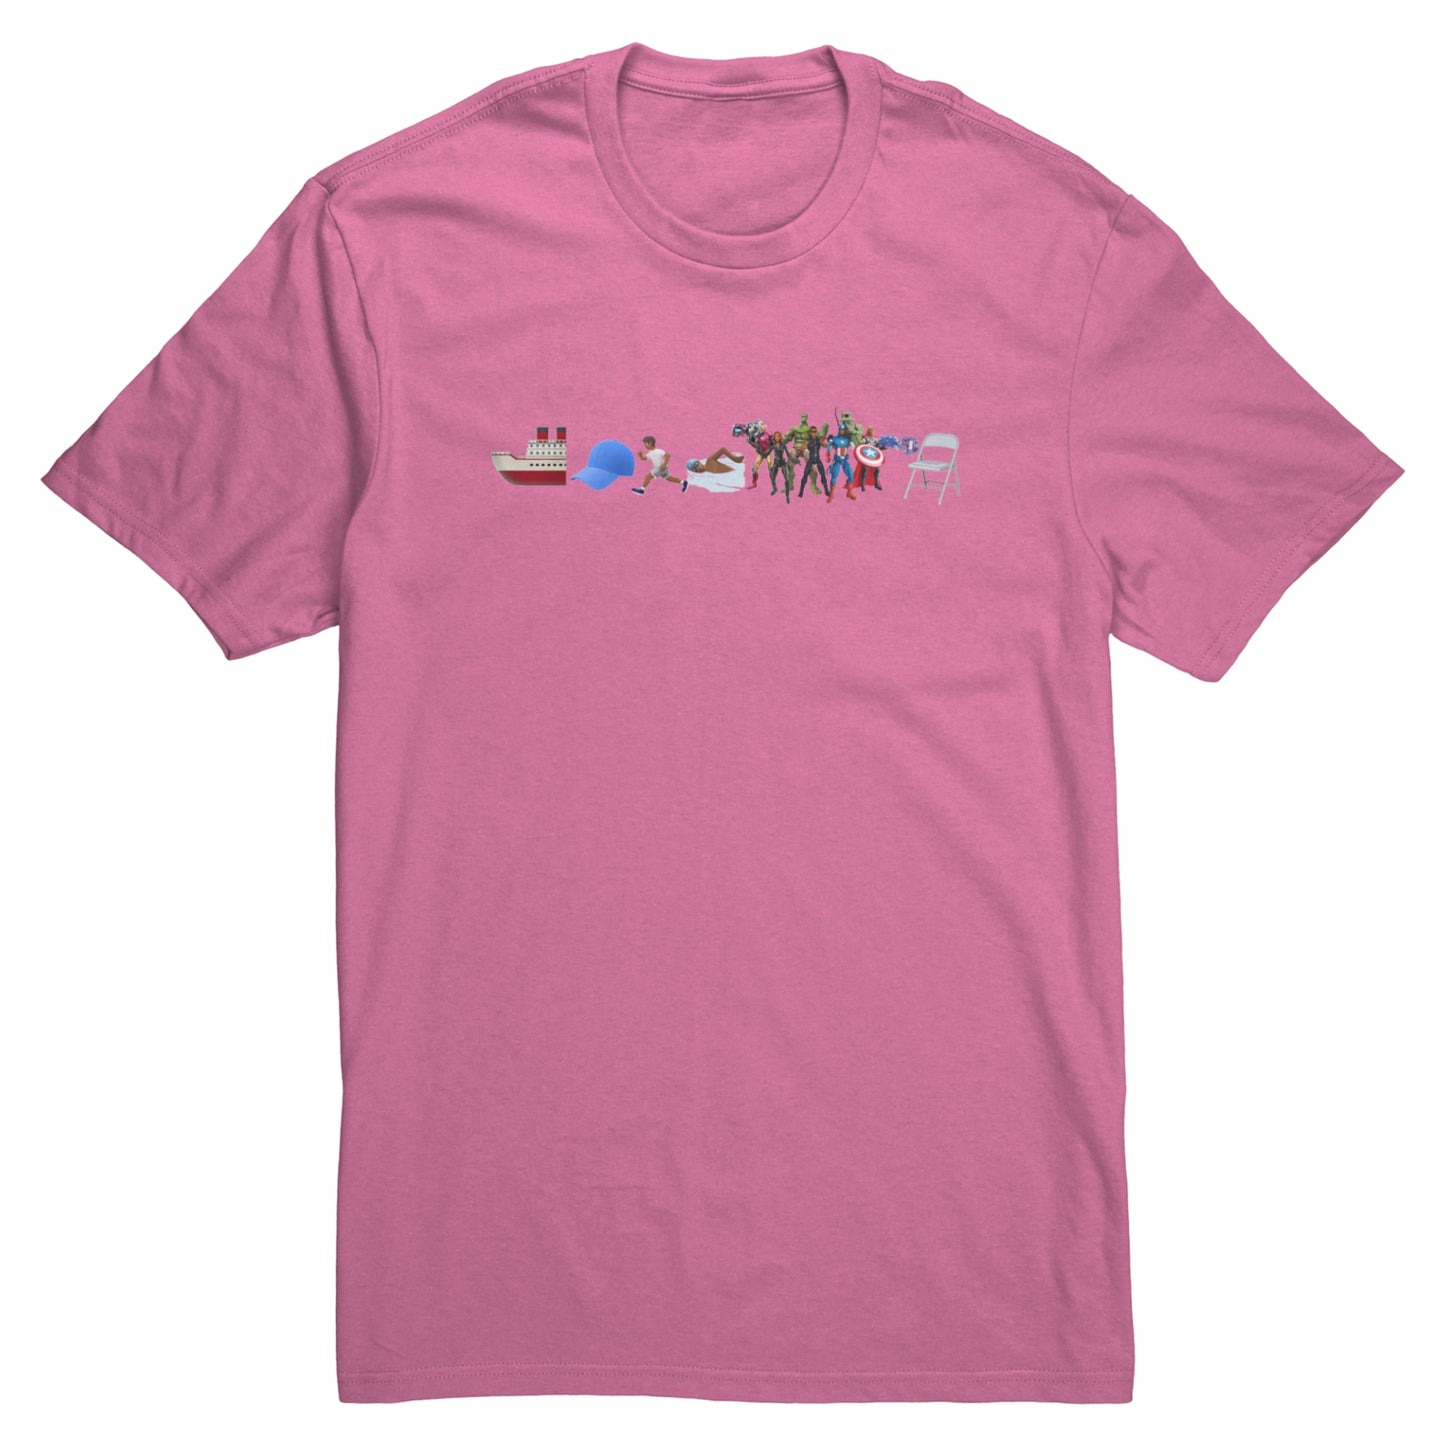 Adult Tee "The Montgomery Mollywop 2023"